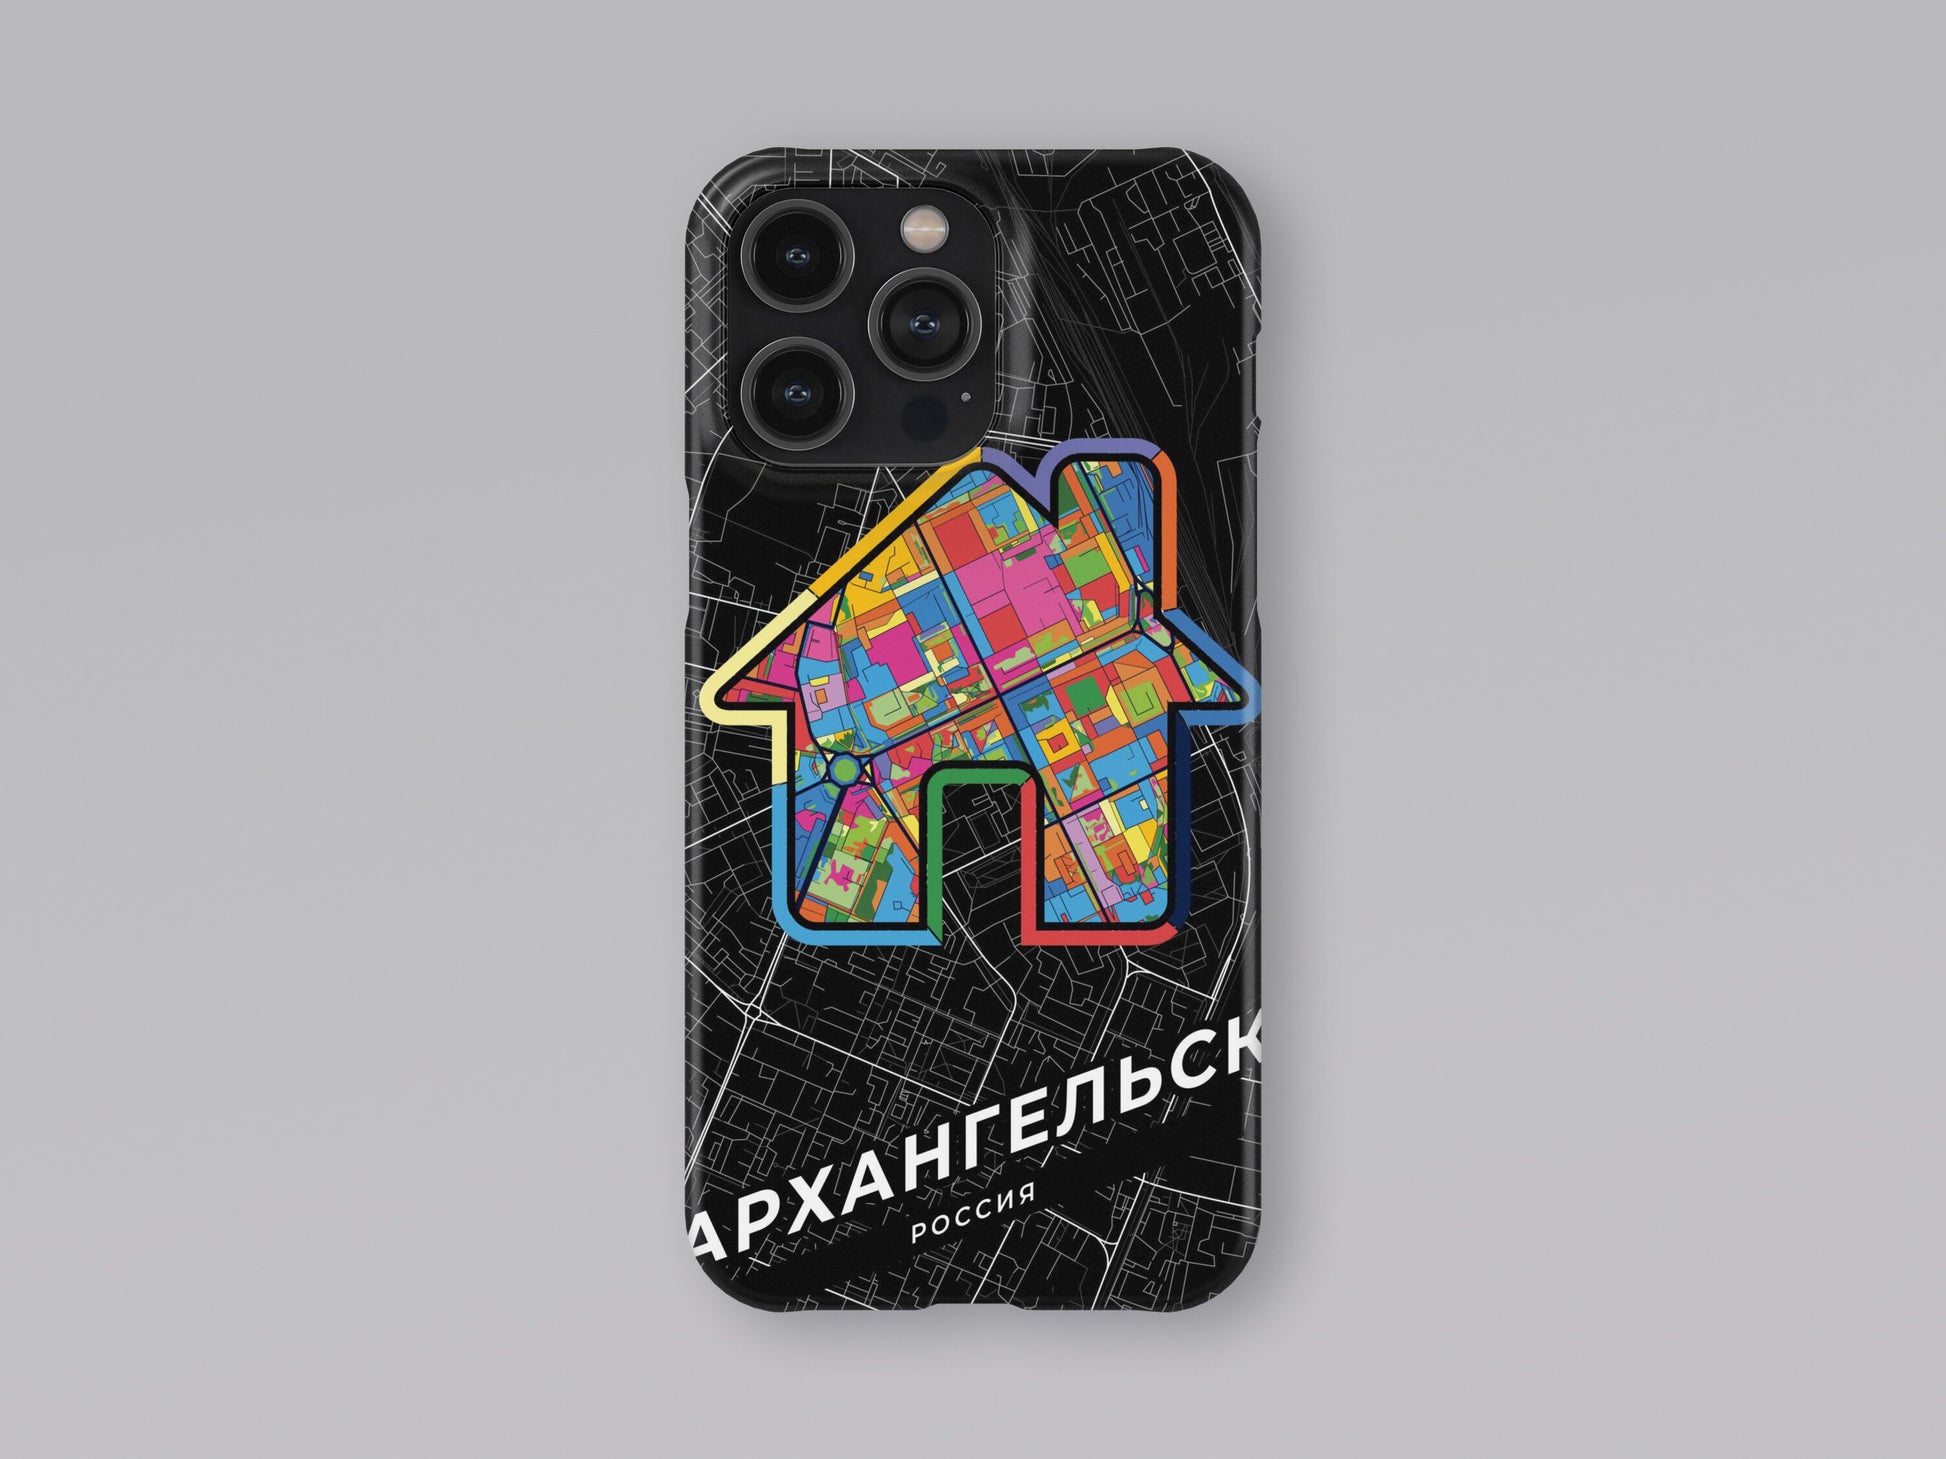 Arkhangelsk Russia slim phone case with colorful icon. Birthday, wedding or housewarming gift. Couple match cases. 3